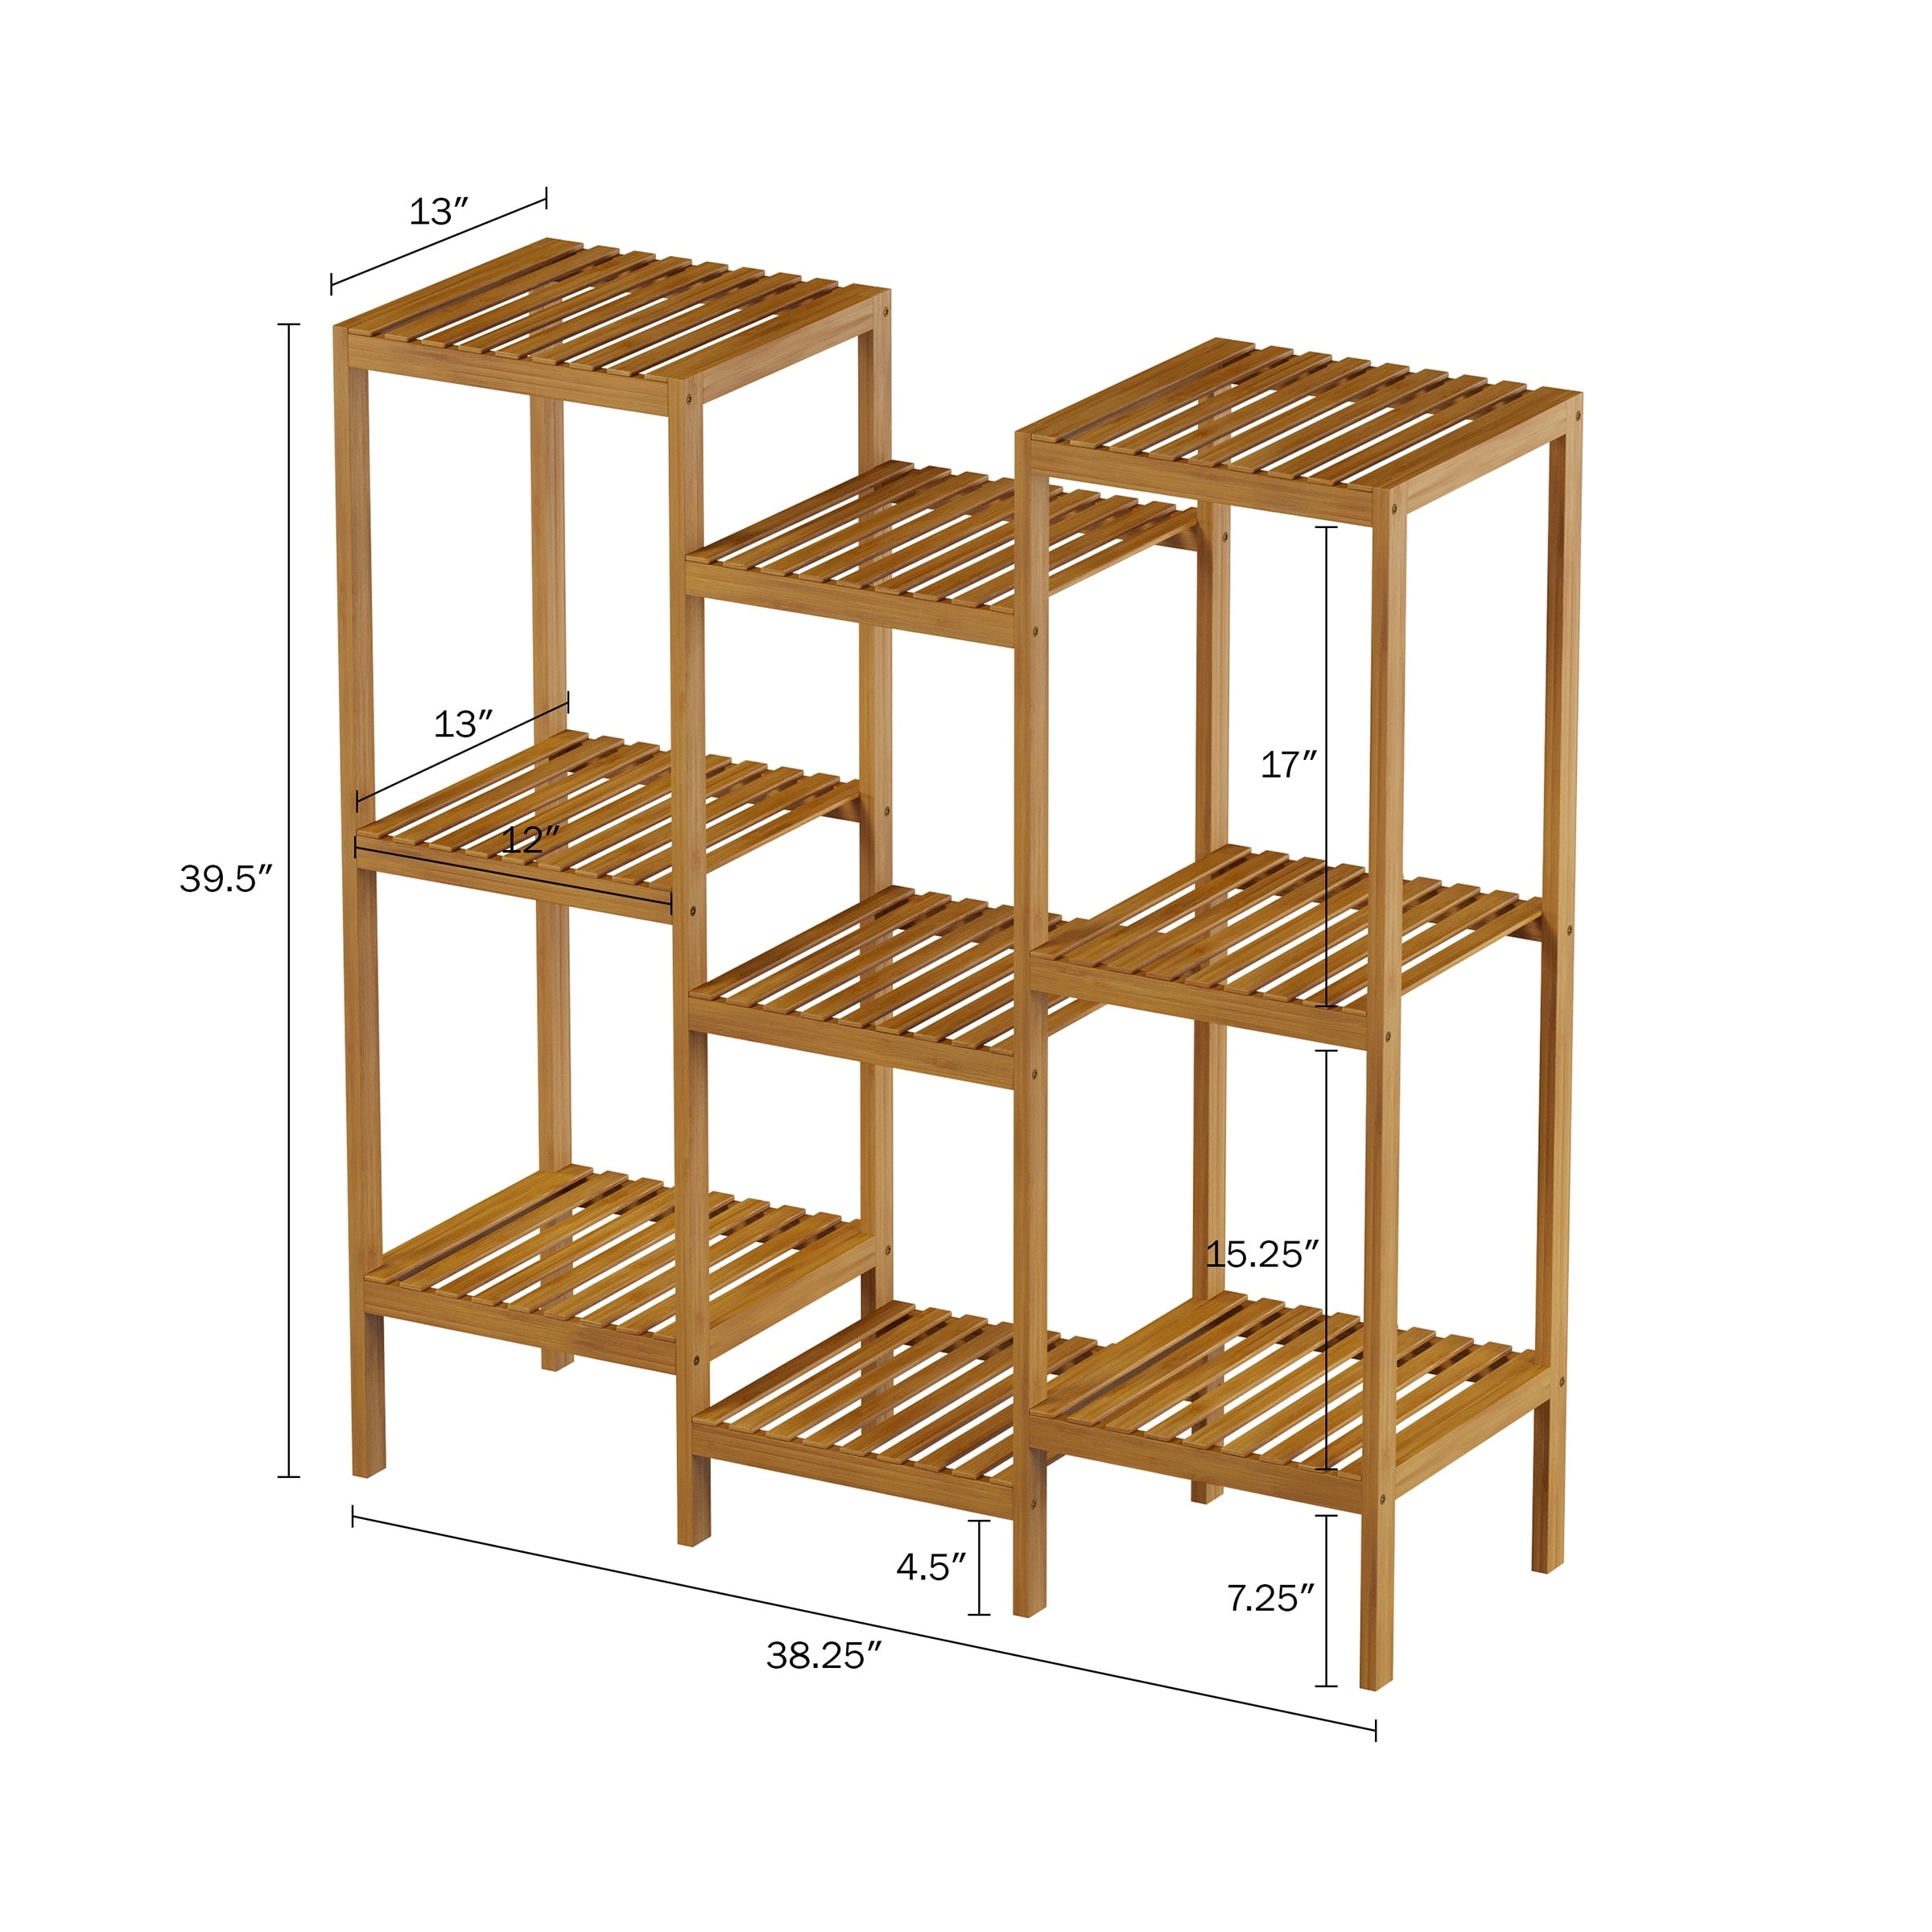 https://ak1.ostkcdn.com/images/products/is/images/direct/af0a6e83edf5833d8aee36688b25a91e08a87139/Multi-Level-Freestanding-9-Shelf-Bamboo-Plant-Stand-by-Pure-Garden.jpg